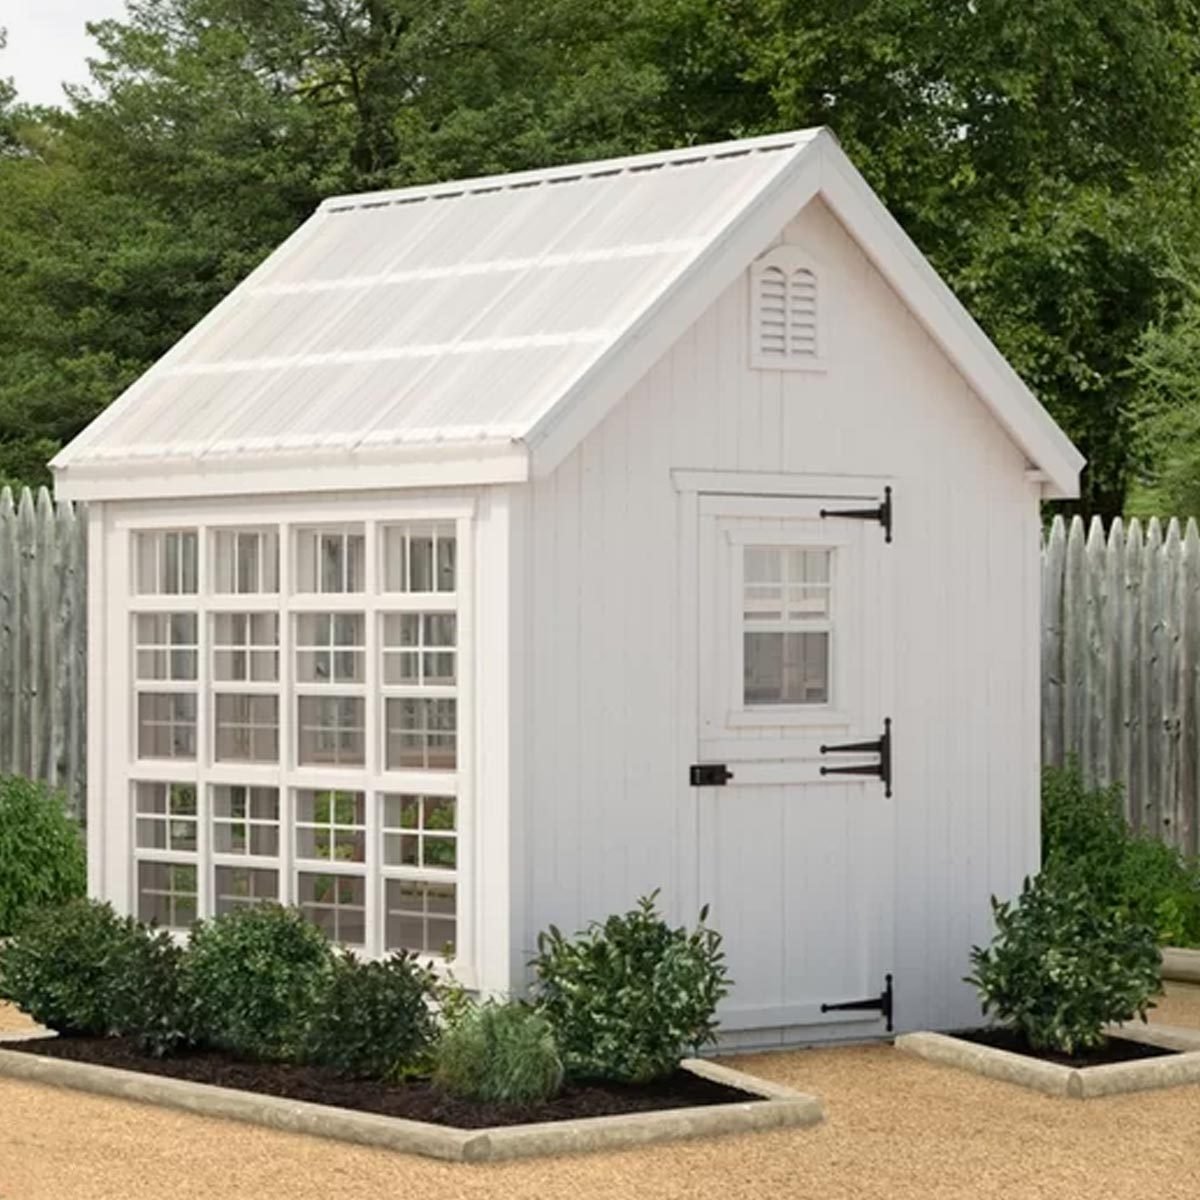 7 Tiny House Kits to Make Your Minimalism Dreams Come True